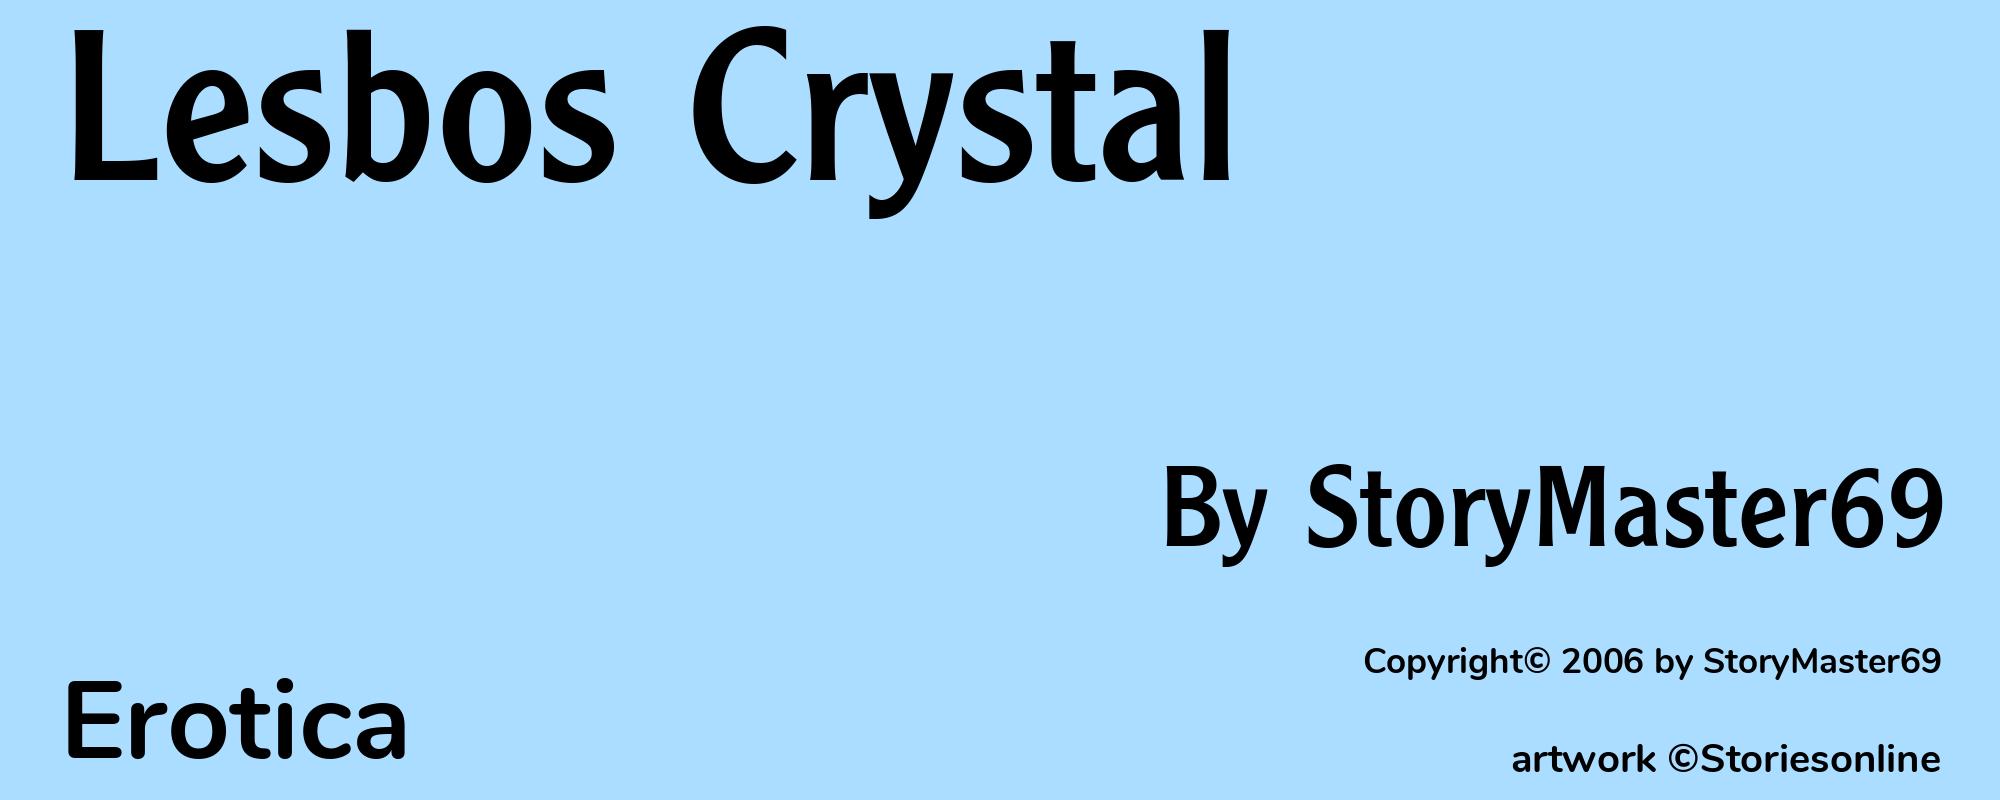 Lesbos Crystal - Cover